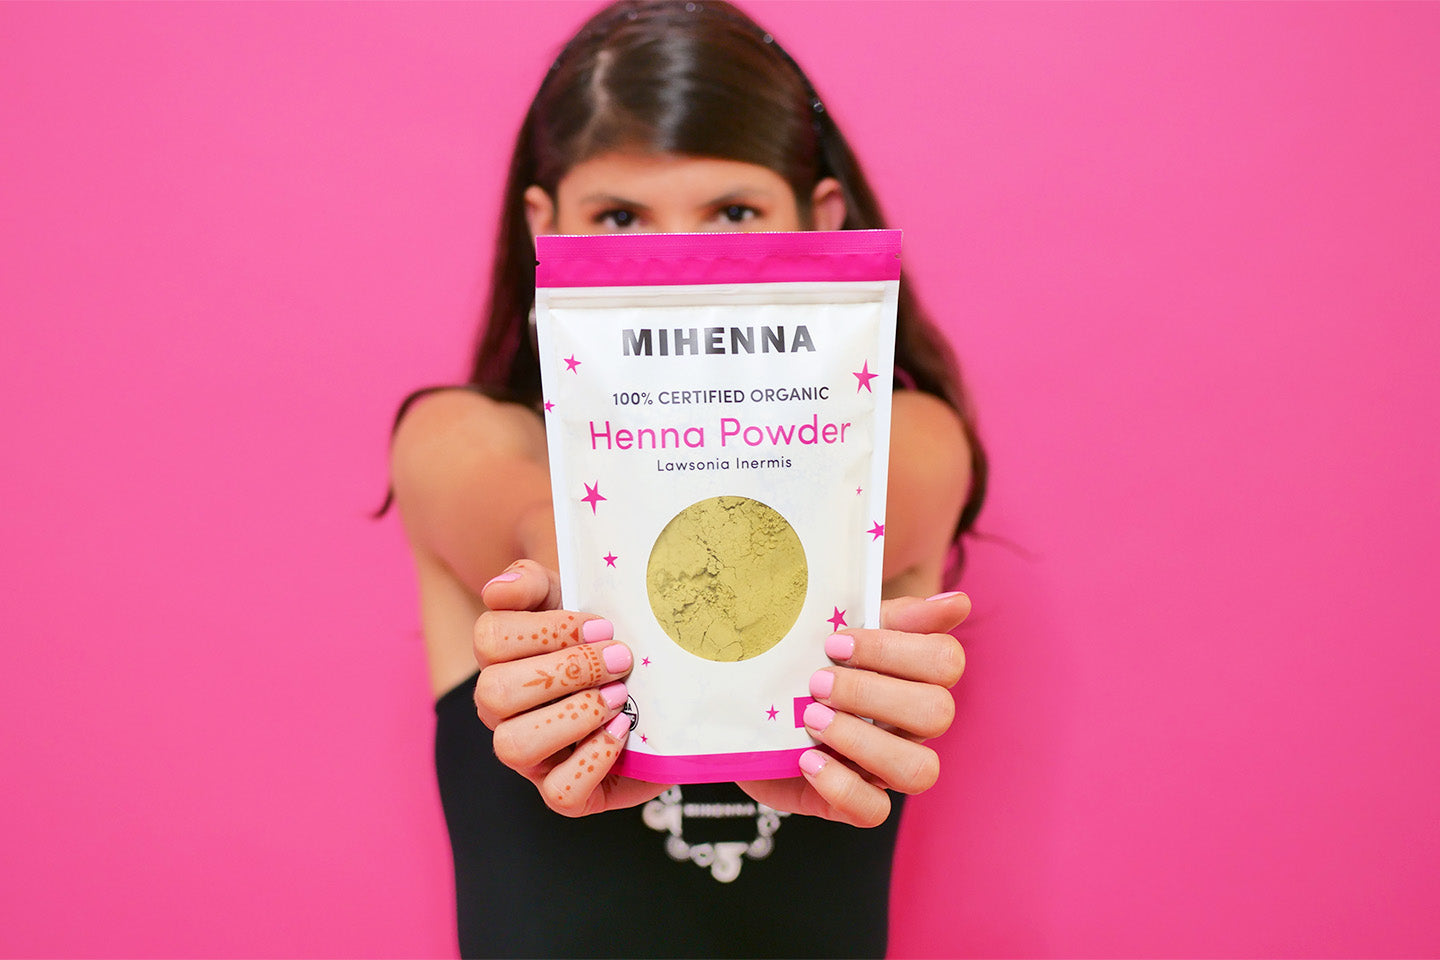 7 Amazing Uses Of Henna Powder You Didn't Know